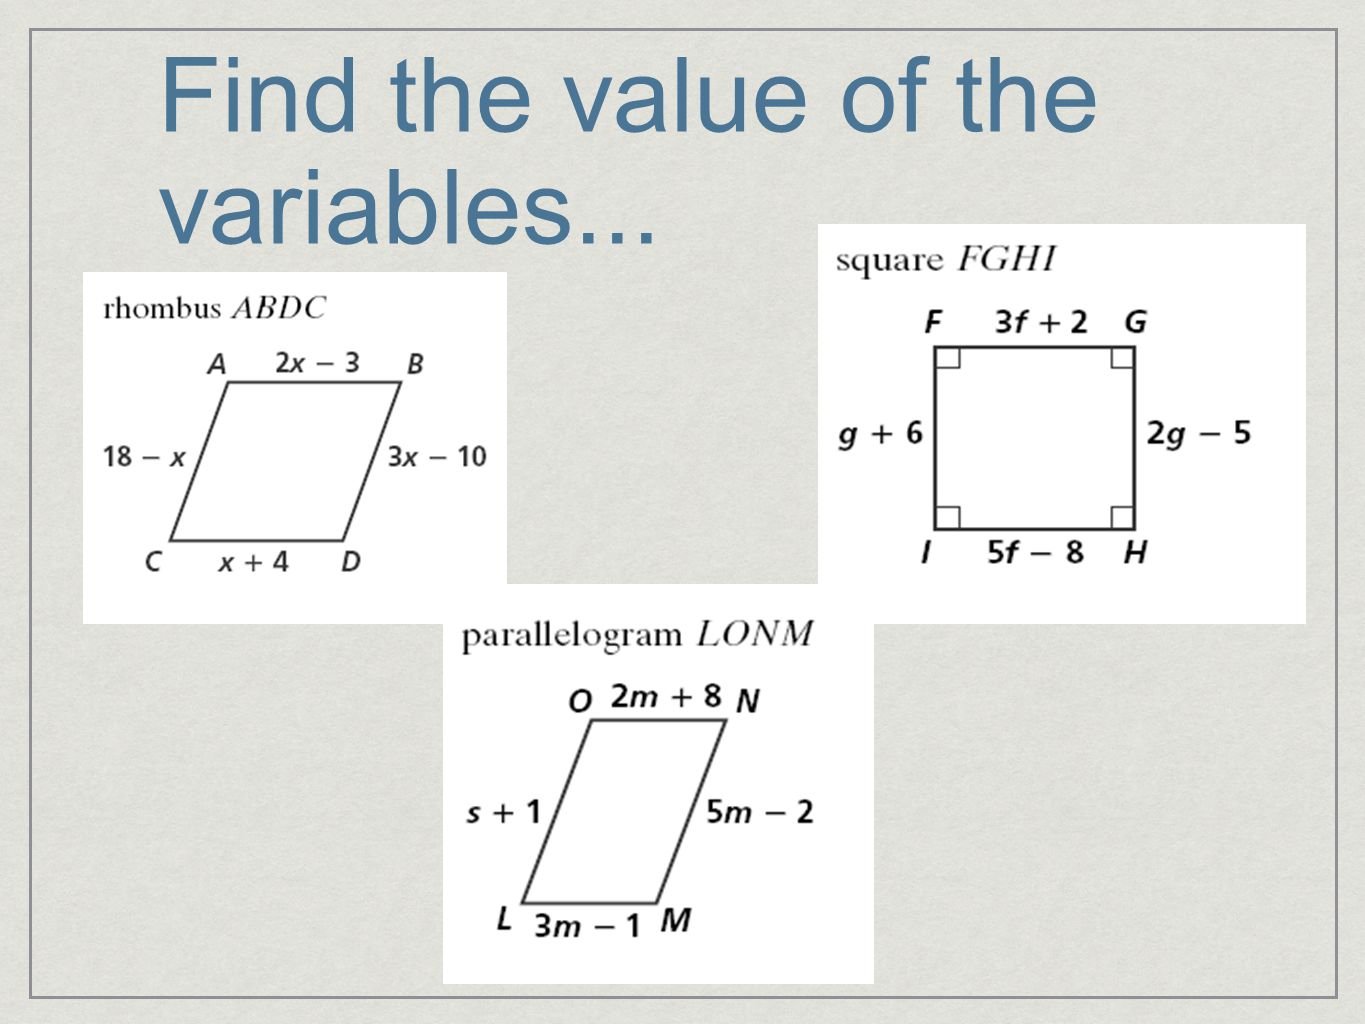 Find the value of the variables...